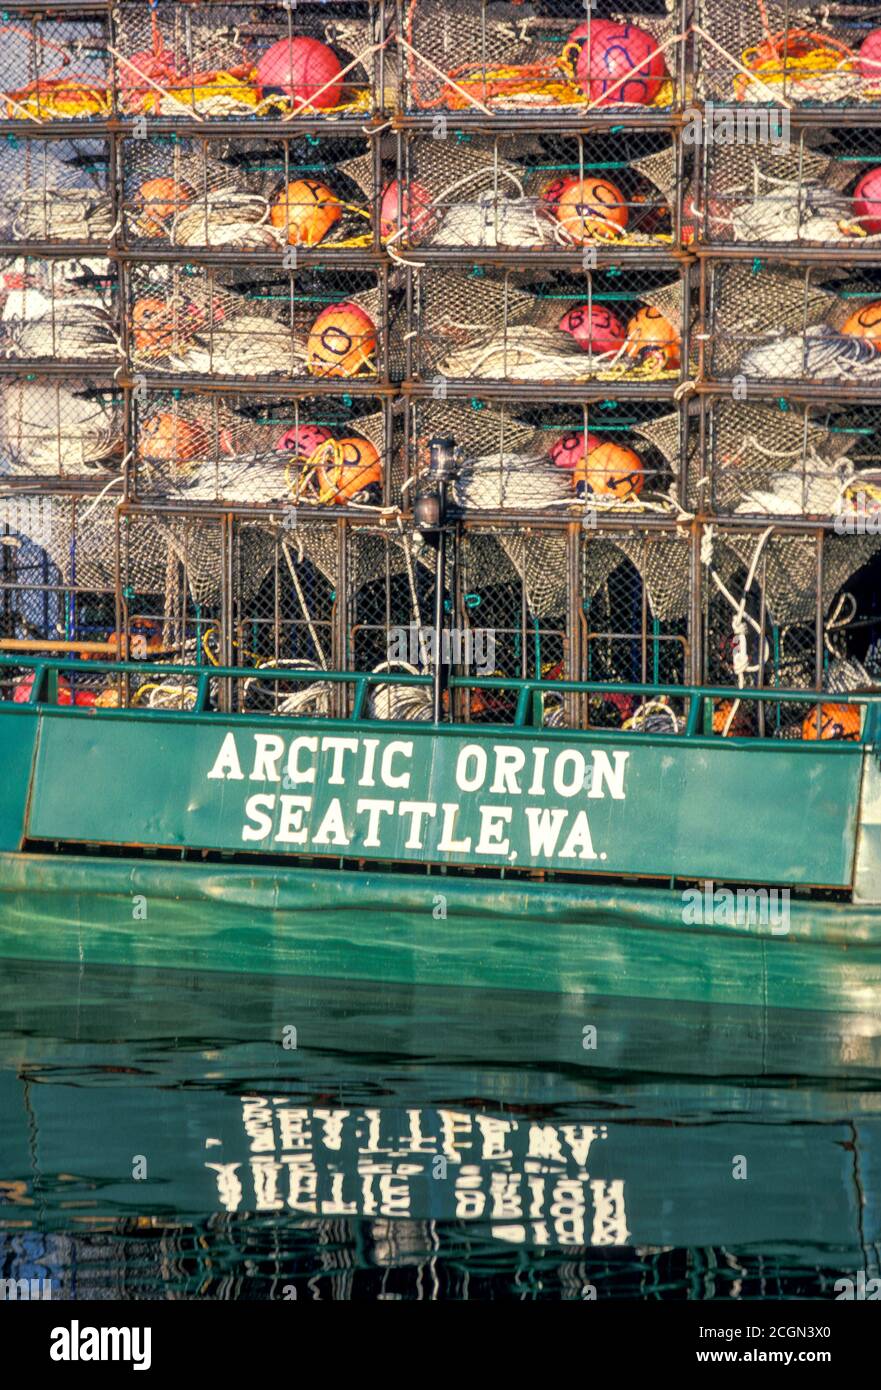 Crab pots stacked at stern of commercial crab boat, Seattle, Washington USA Stock Photo